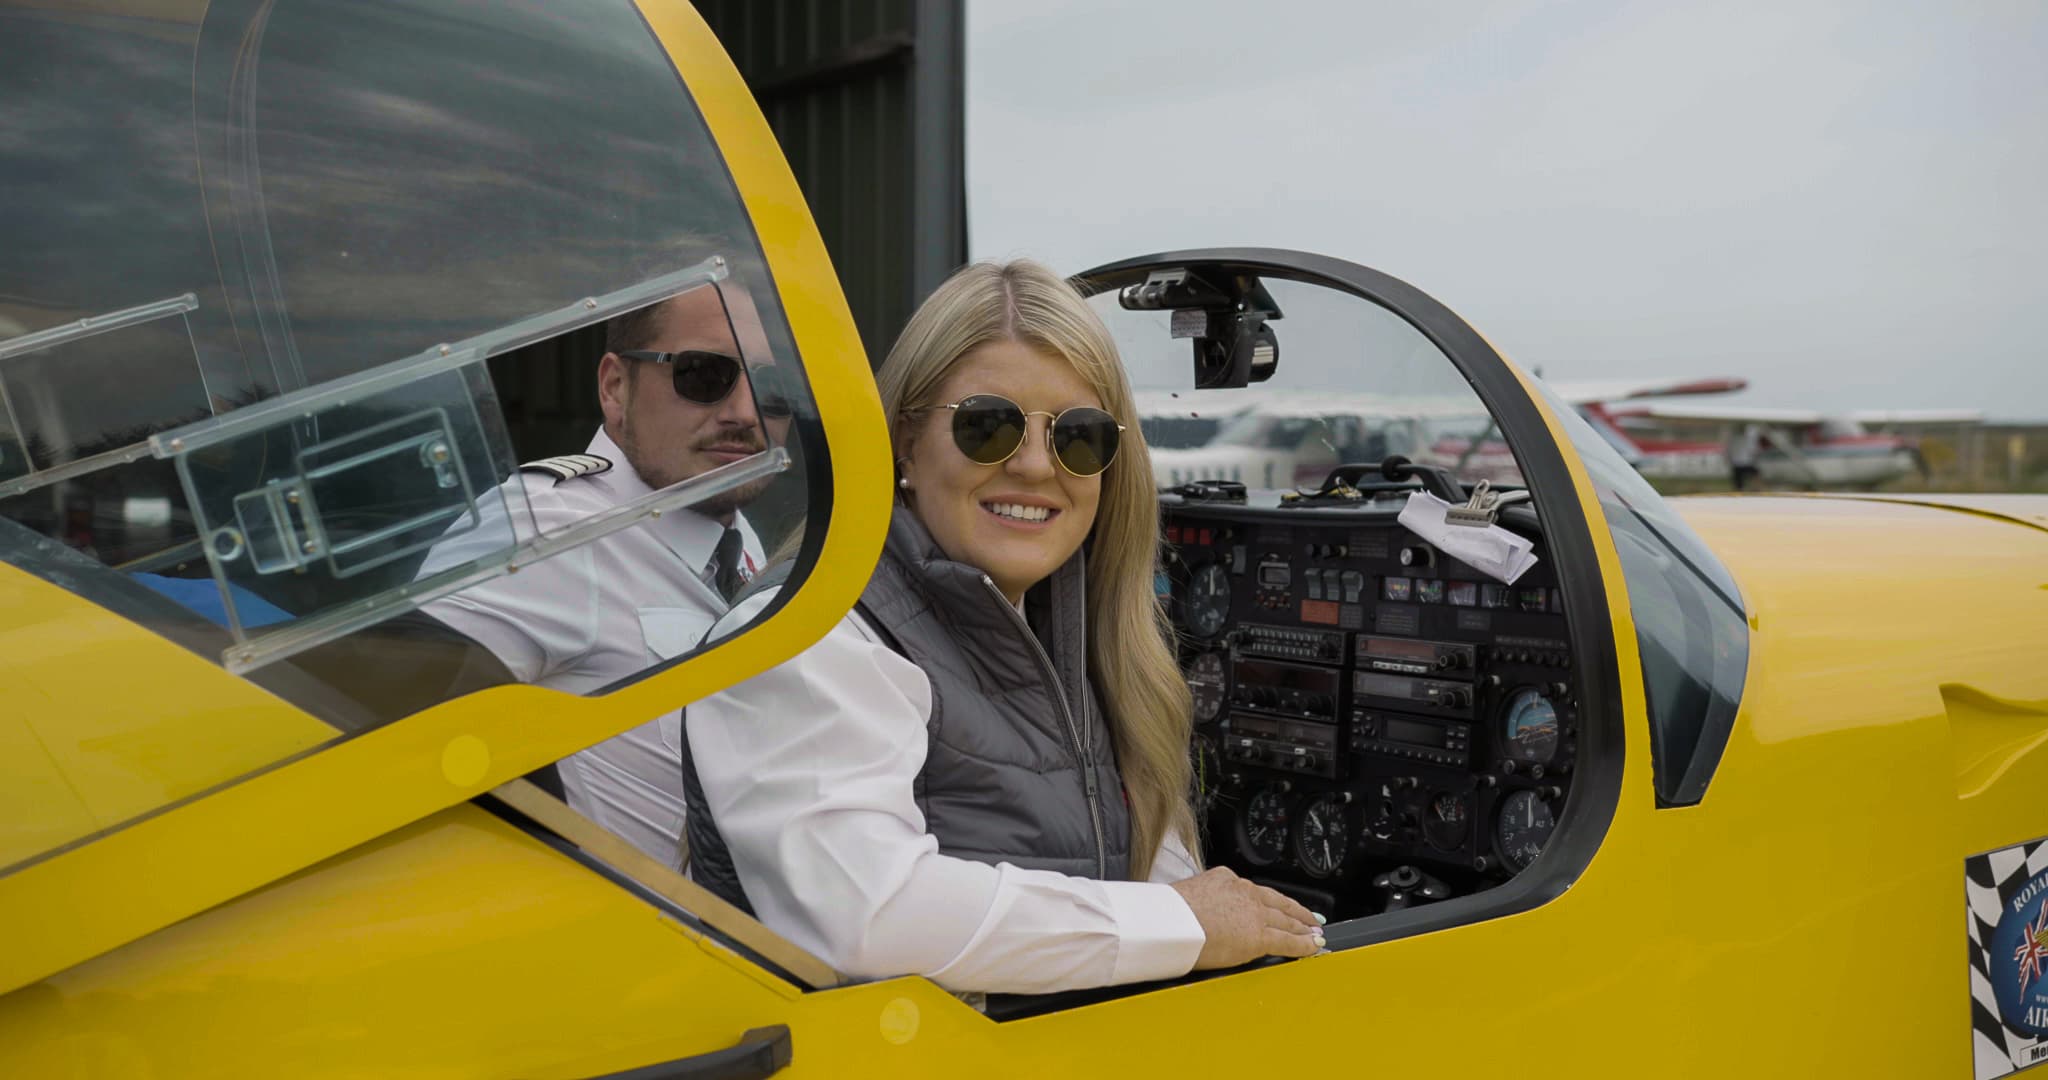 Two pilots in a yellow plane